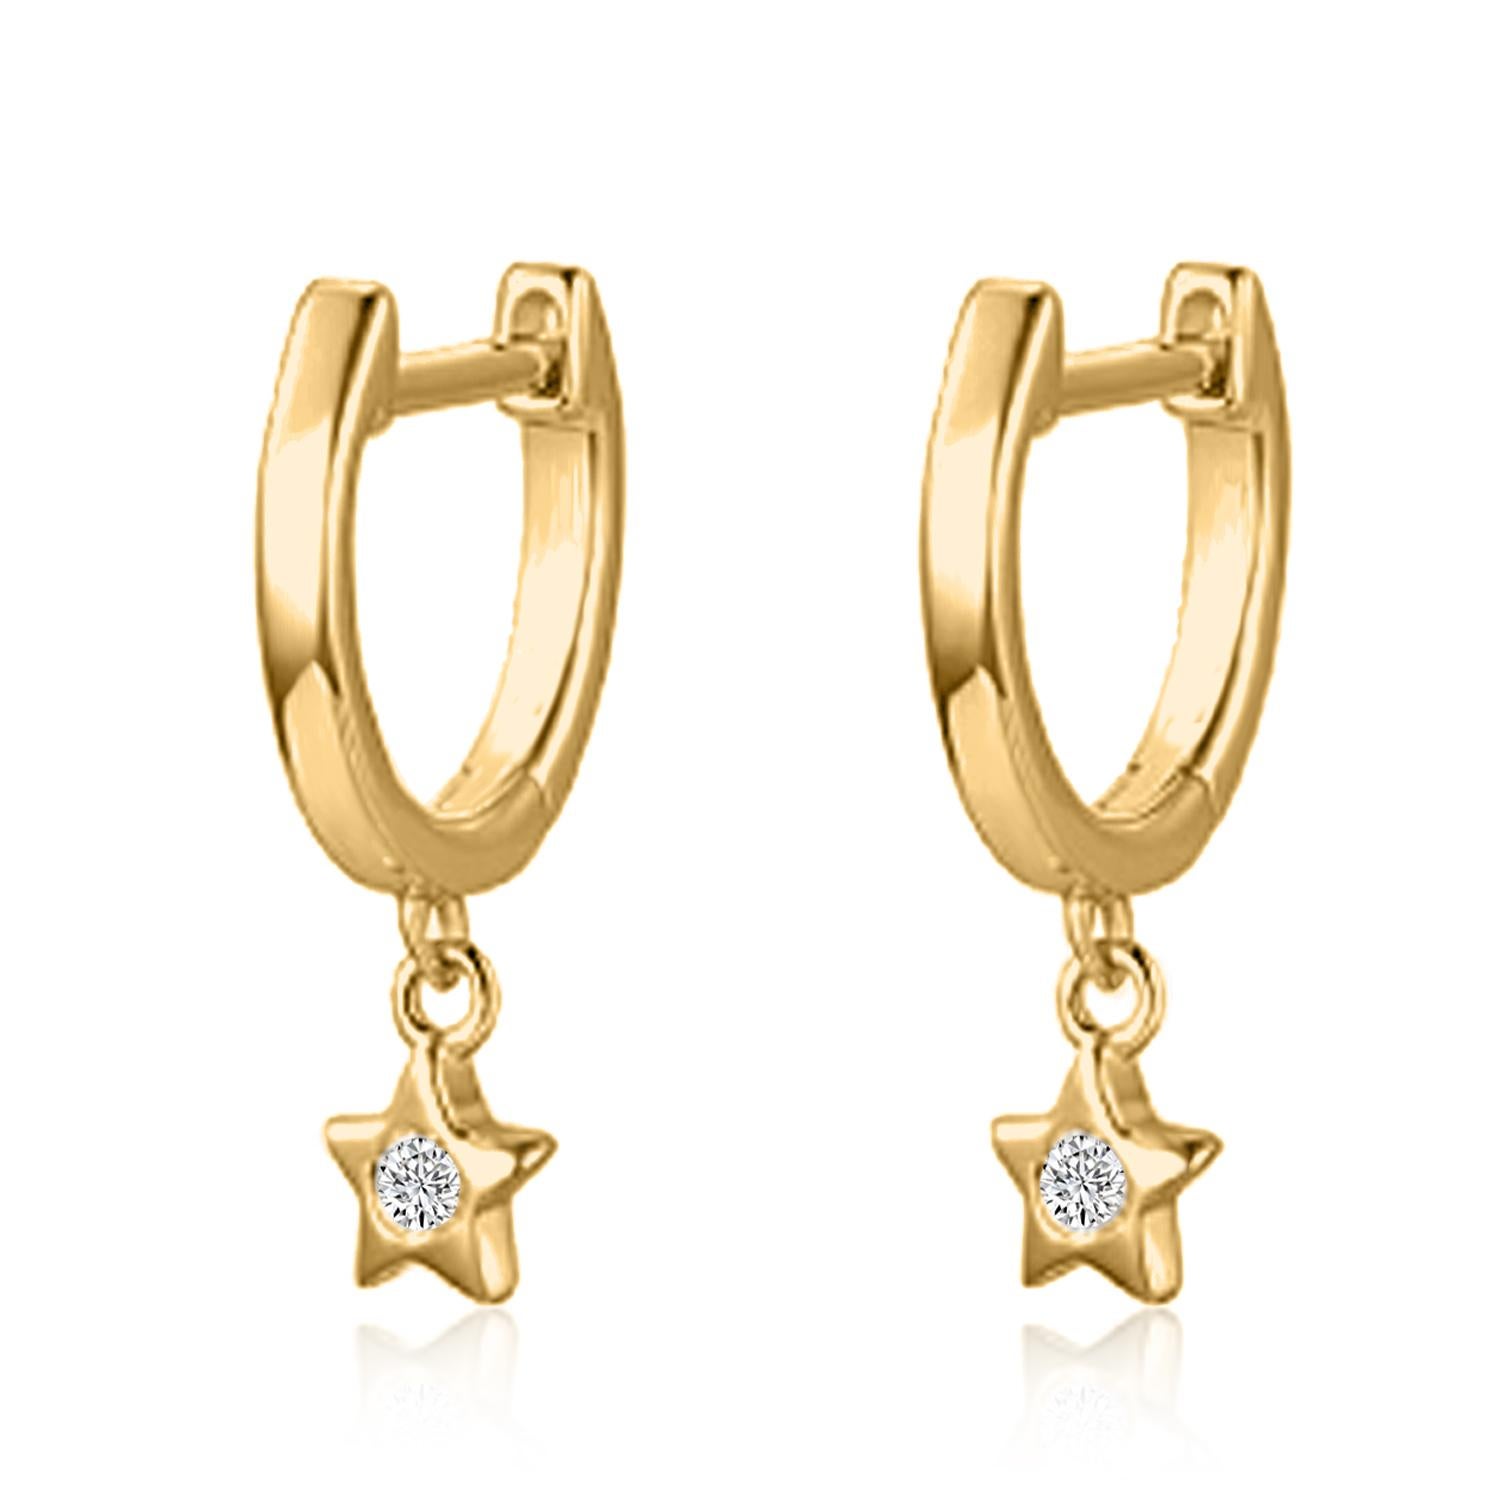 14K Mini Dangling Diamond Star Huggie Earring

Earring Information
Diamond Type : Natural Diamond
Metal : 14k Gold
Metal Color : Rose Gold, Yellow Gold, White Gold
Total Carat Weight : 0.042 ttcw
Diamond colour-clarity : G/H Color VS/Si1 Clarity
